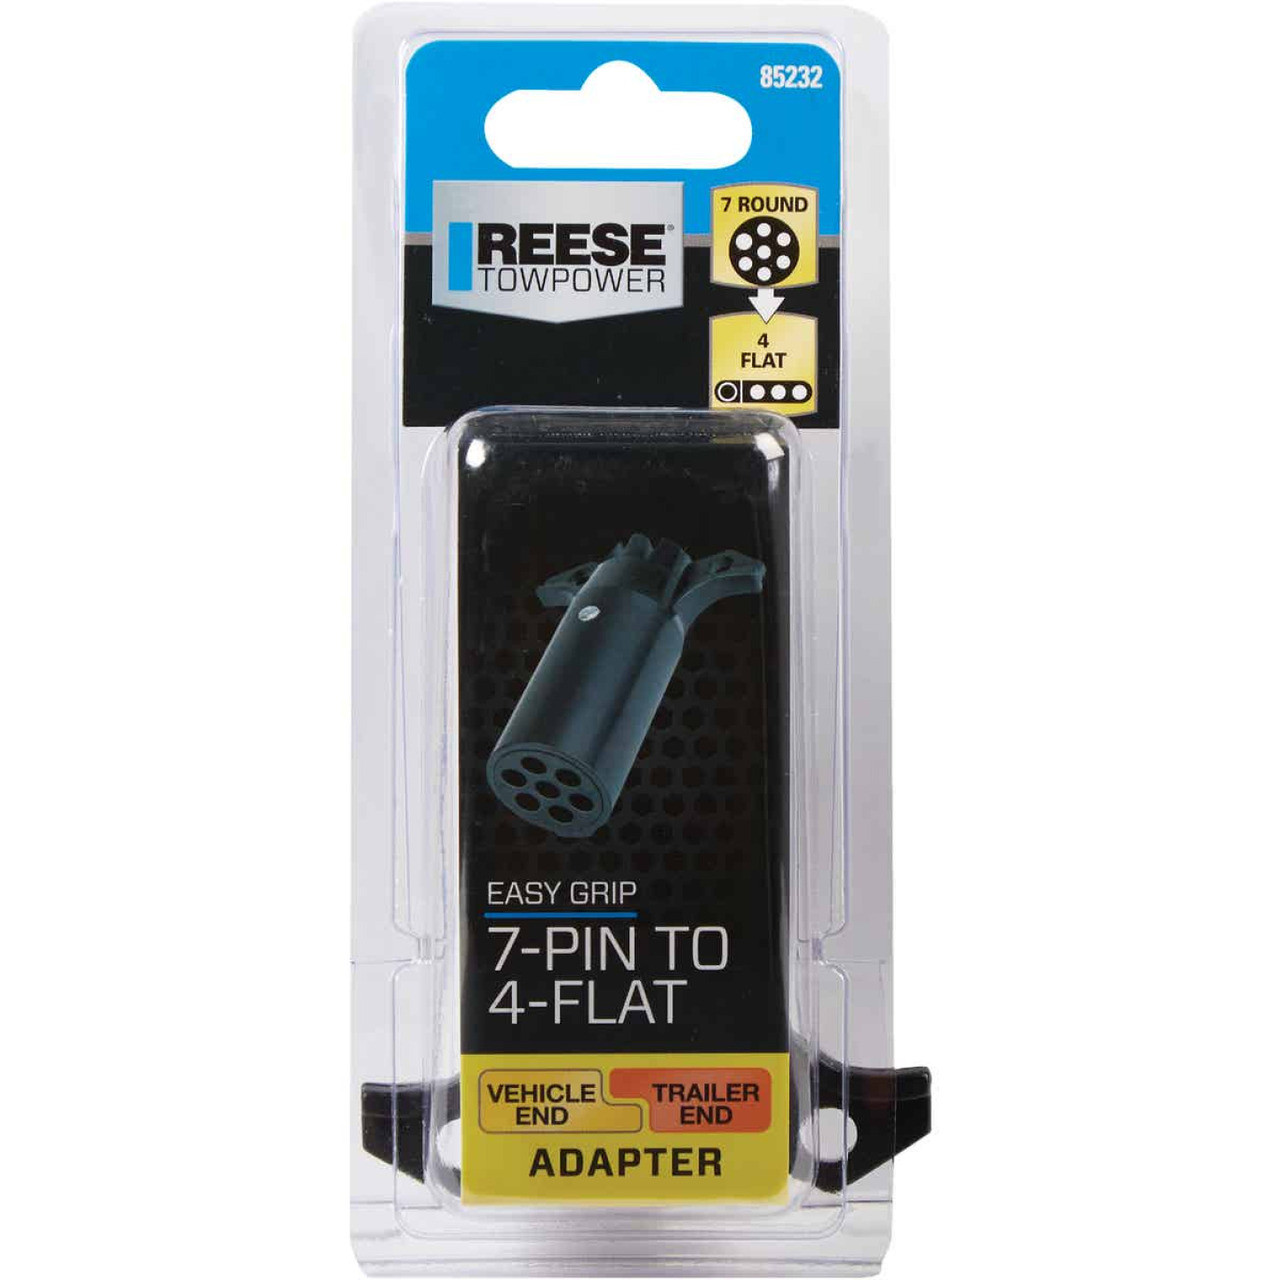 Reese Towpower 7-Pin to 4-Flat Plug-In Adapter